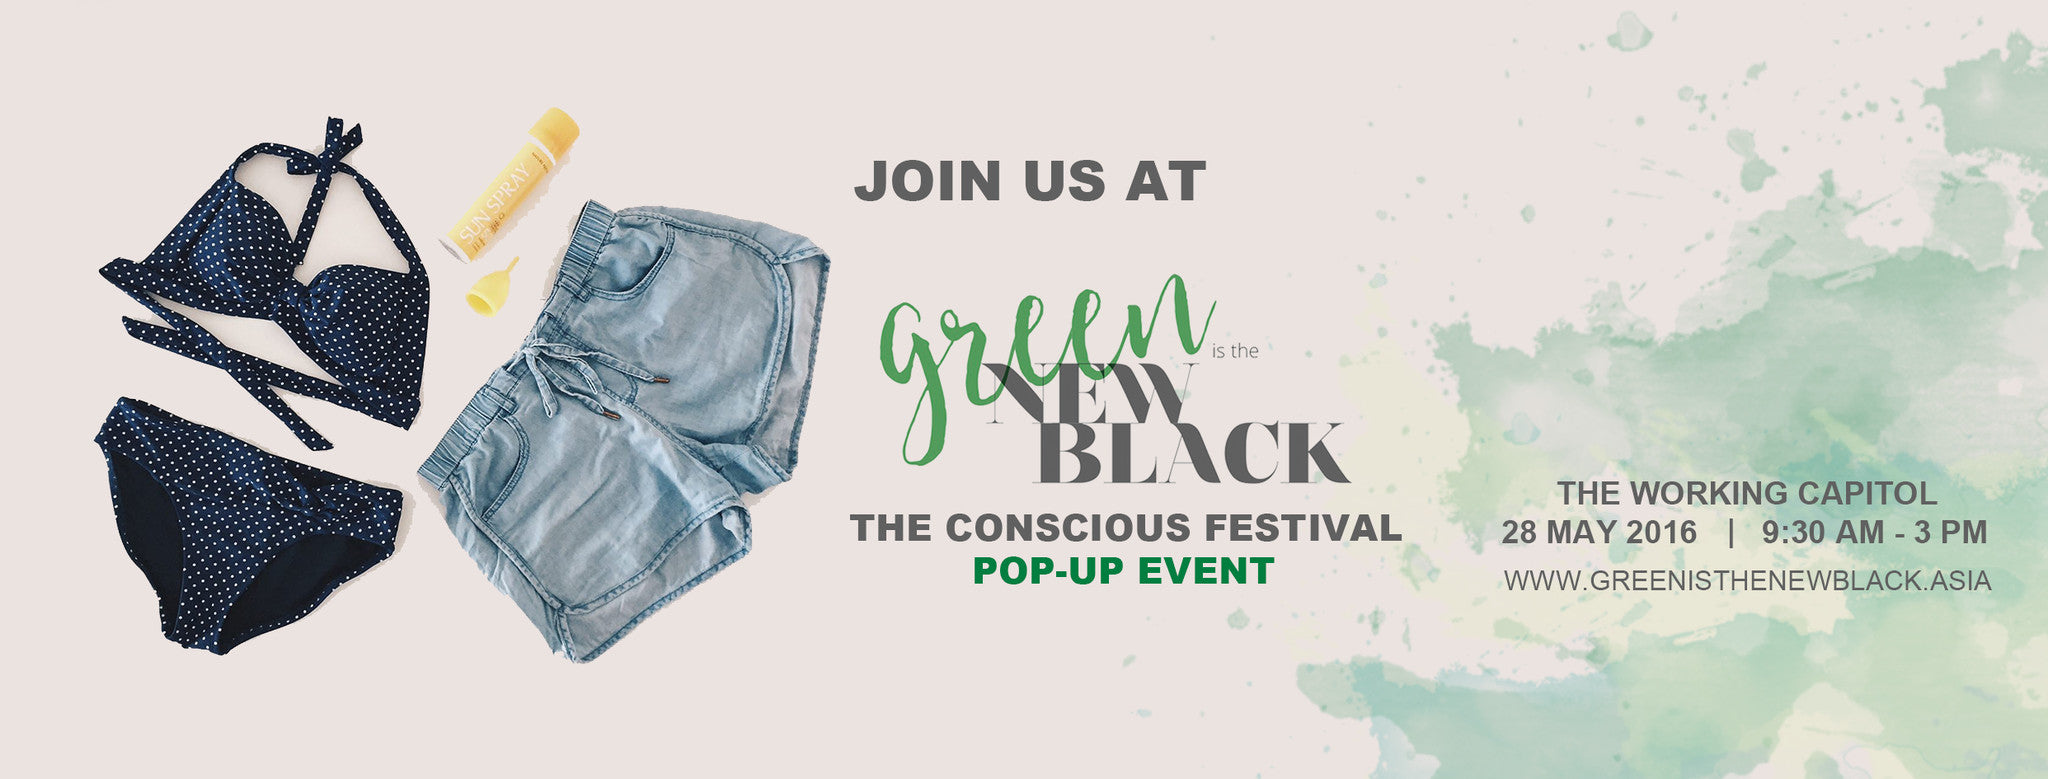 Green is the New Black Pop-Up